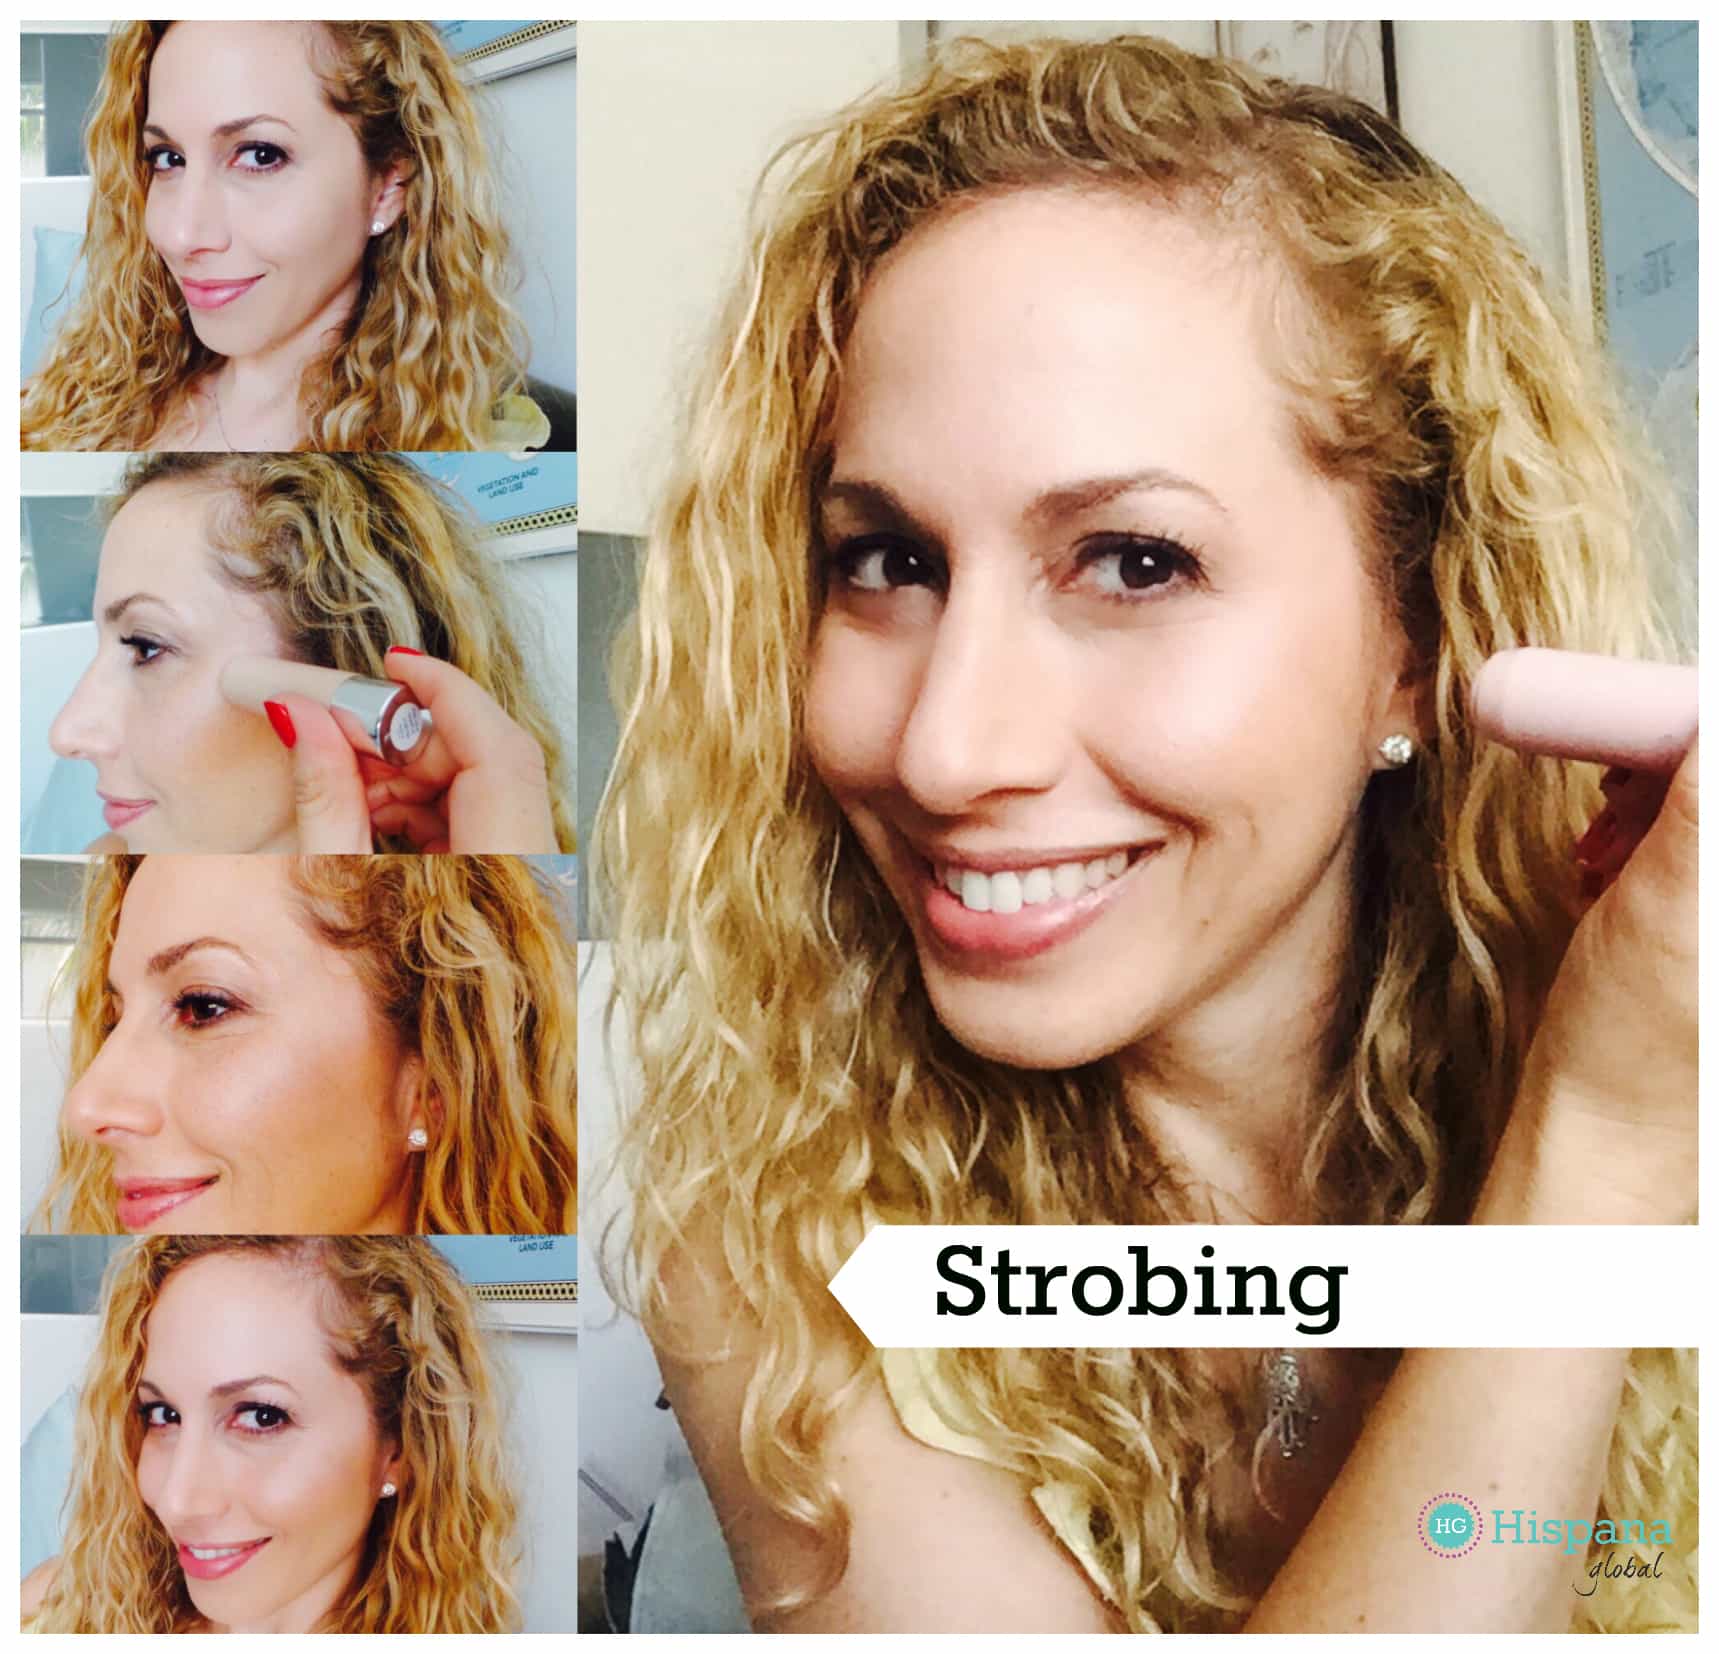 Makeup Tutorial: The Easiest Way to Highlight Your Face Using Strobing